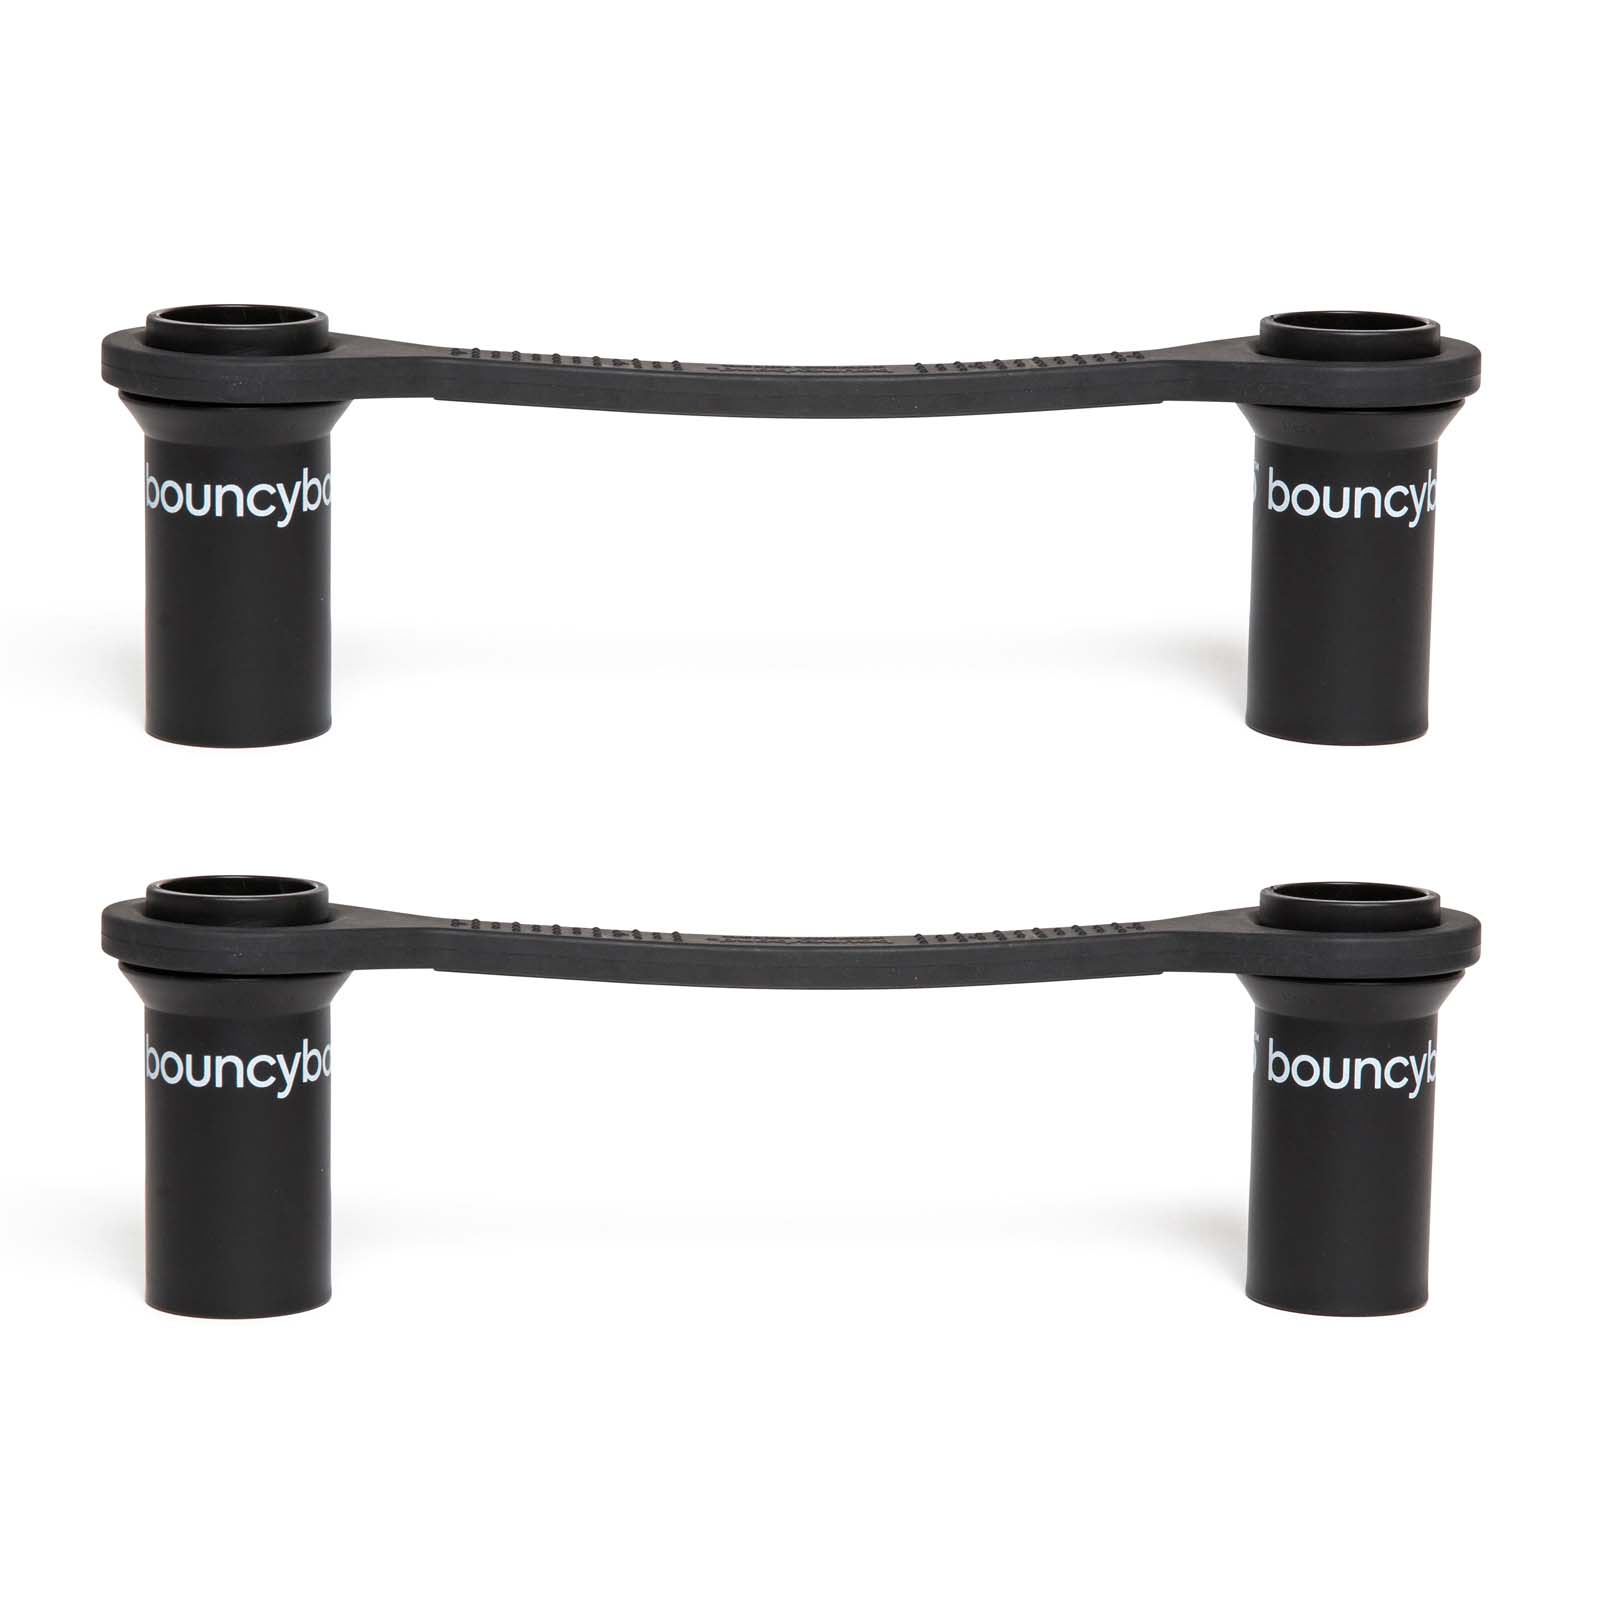 Bouncyband for Chairs, Black, 2 Sets